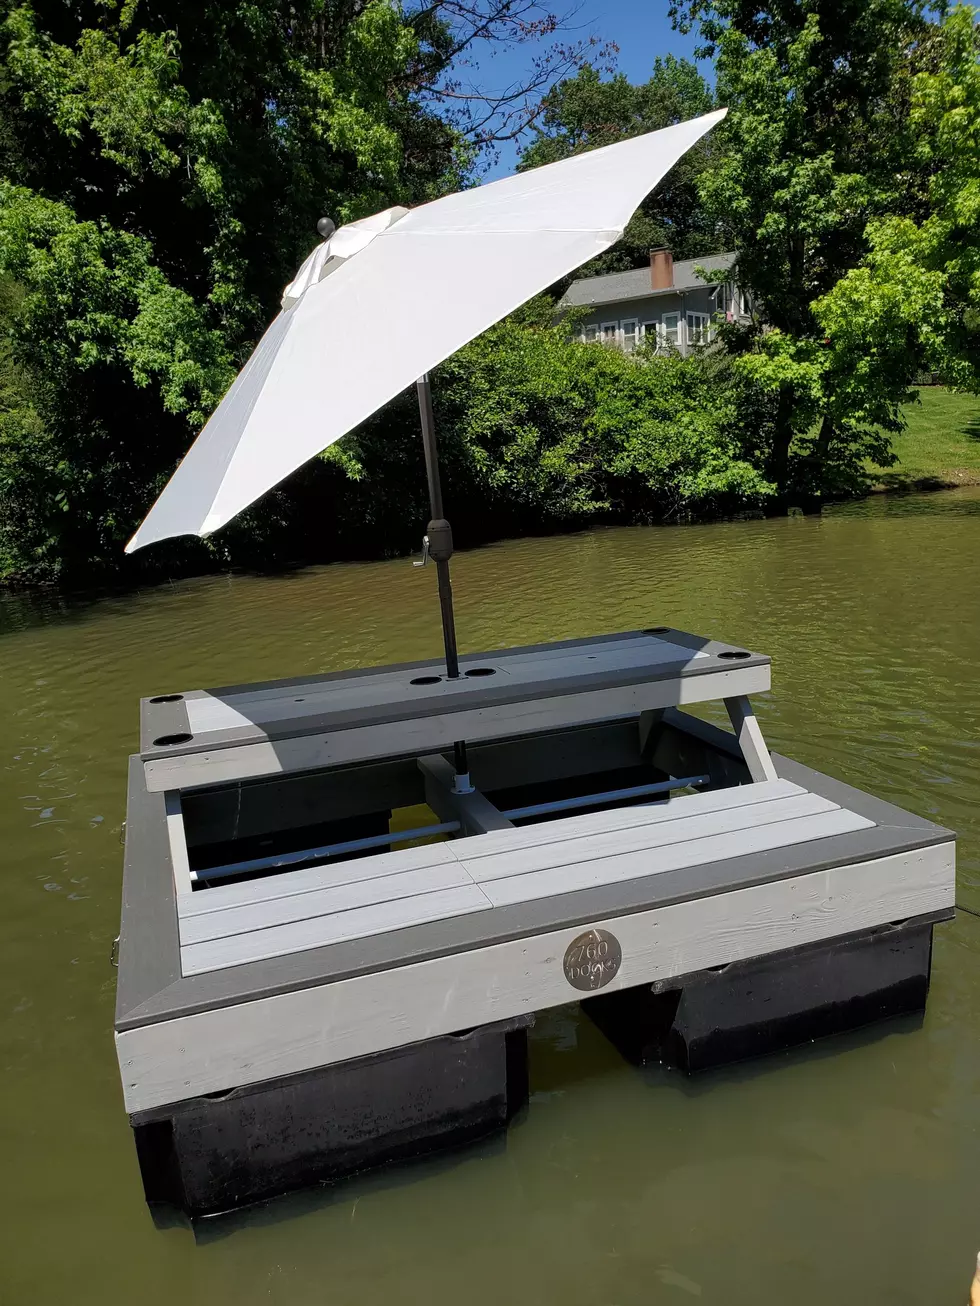 Check Out This Awesome Floating Picnic Table